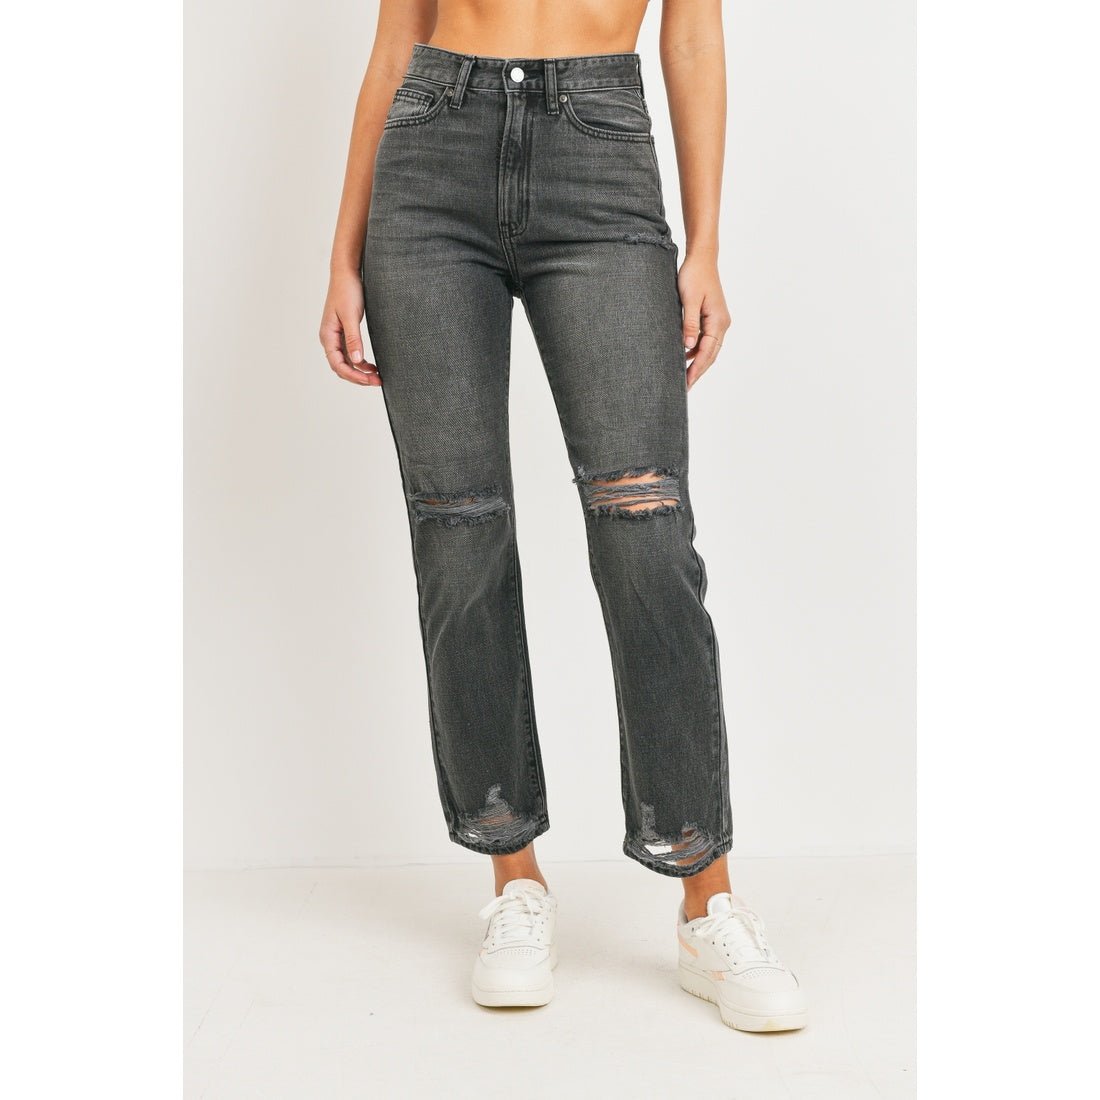 Loose Straight Jean with Distressing - Size 26 - Style Bar